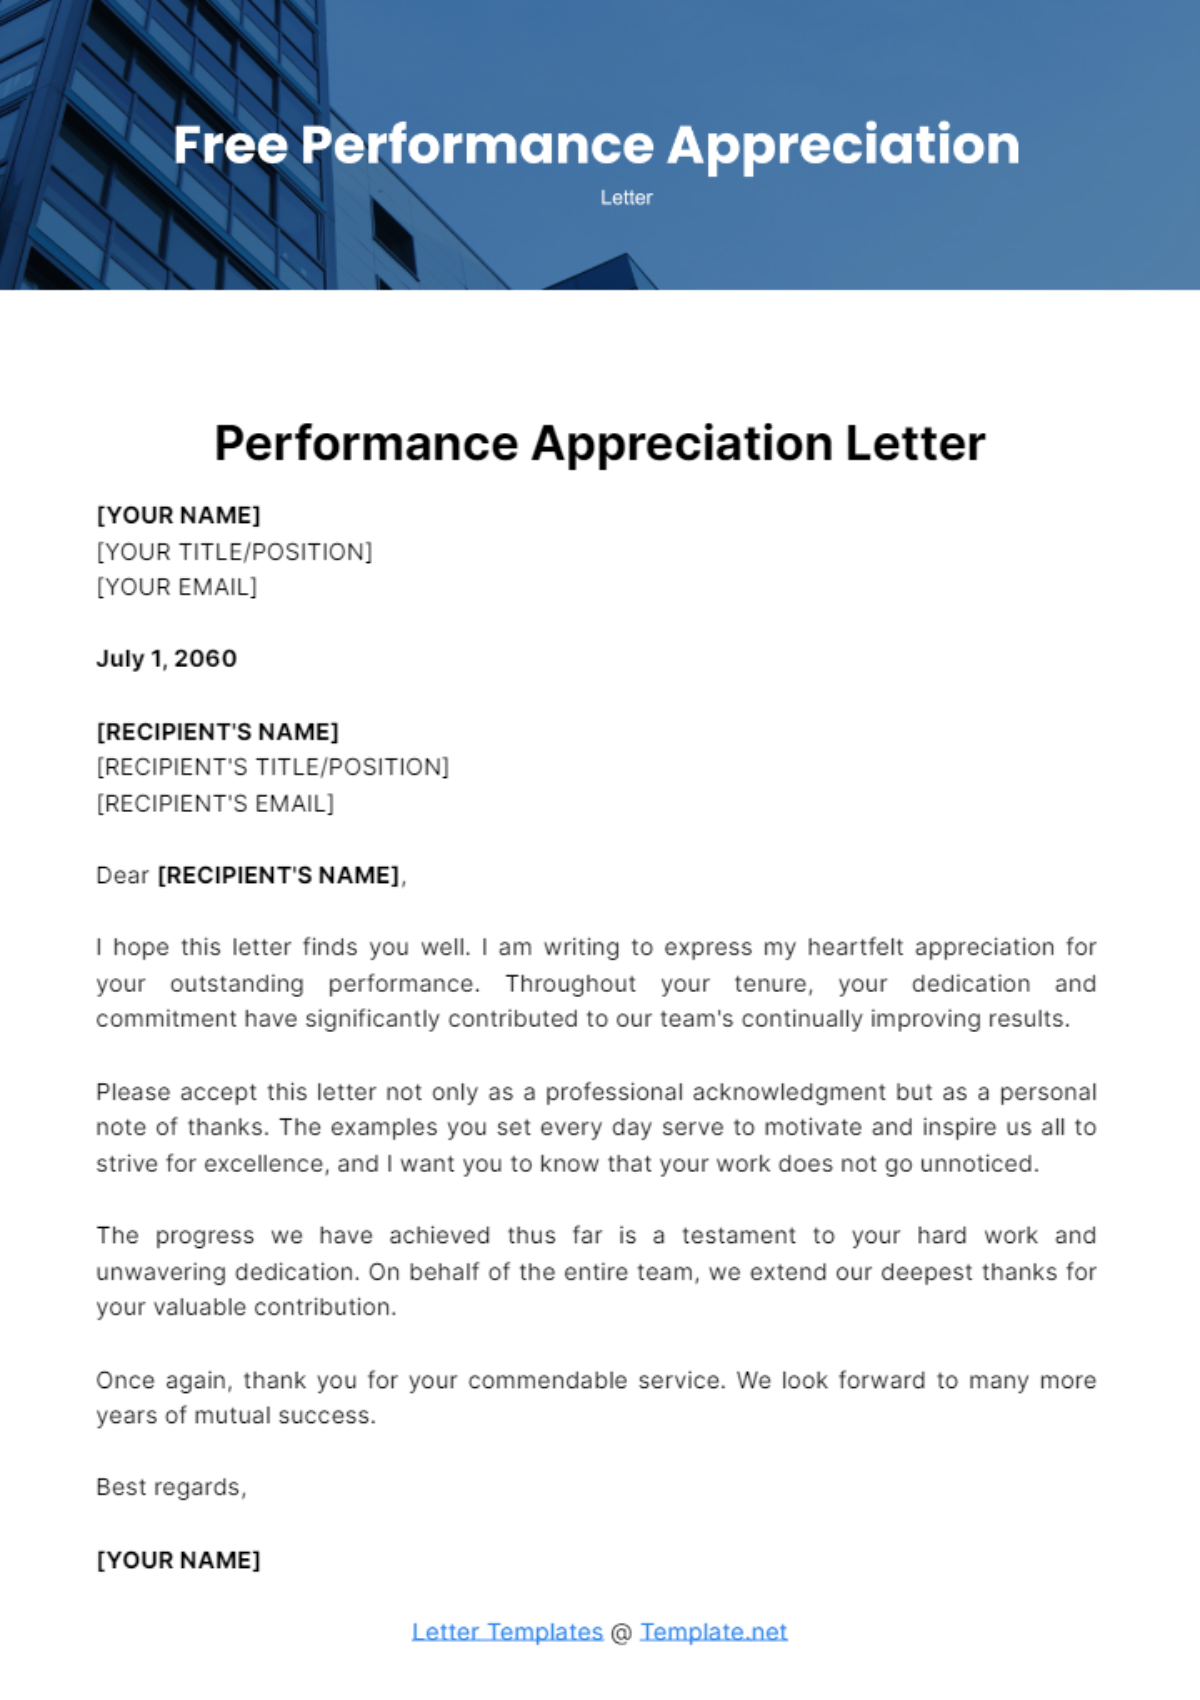 Free Performance Appreciation Letter Template